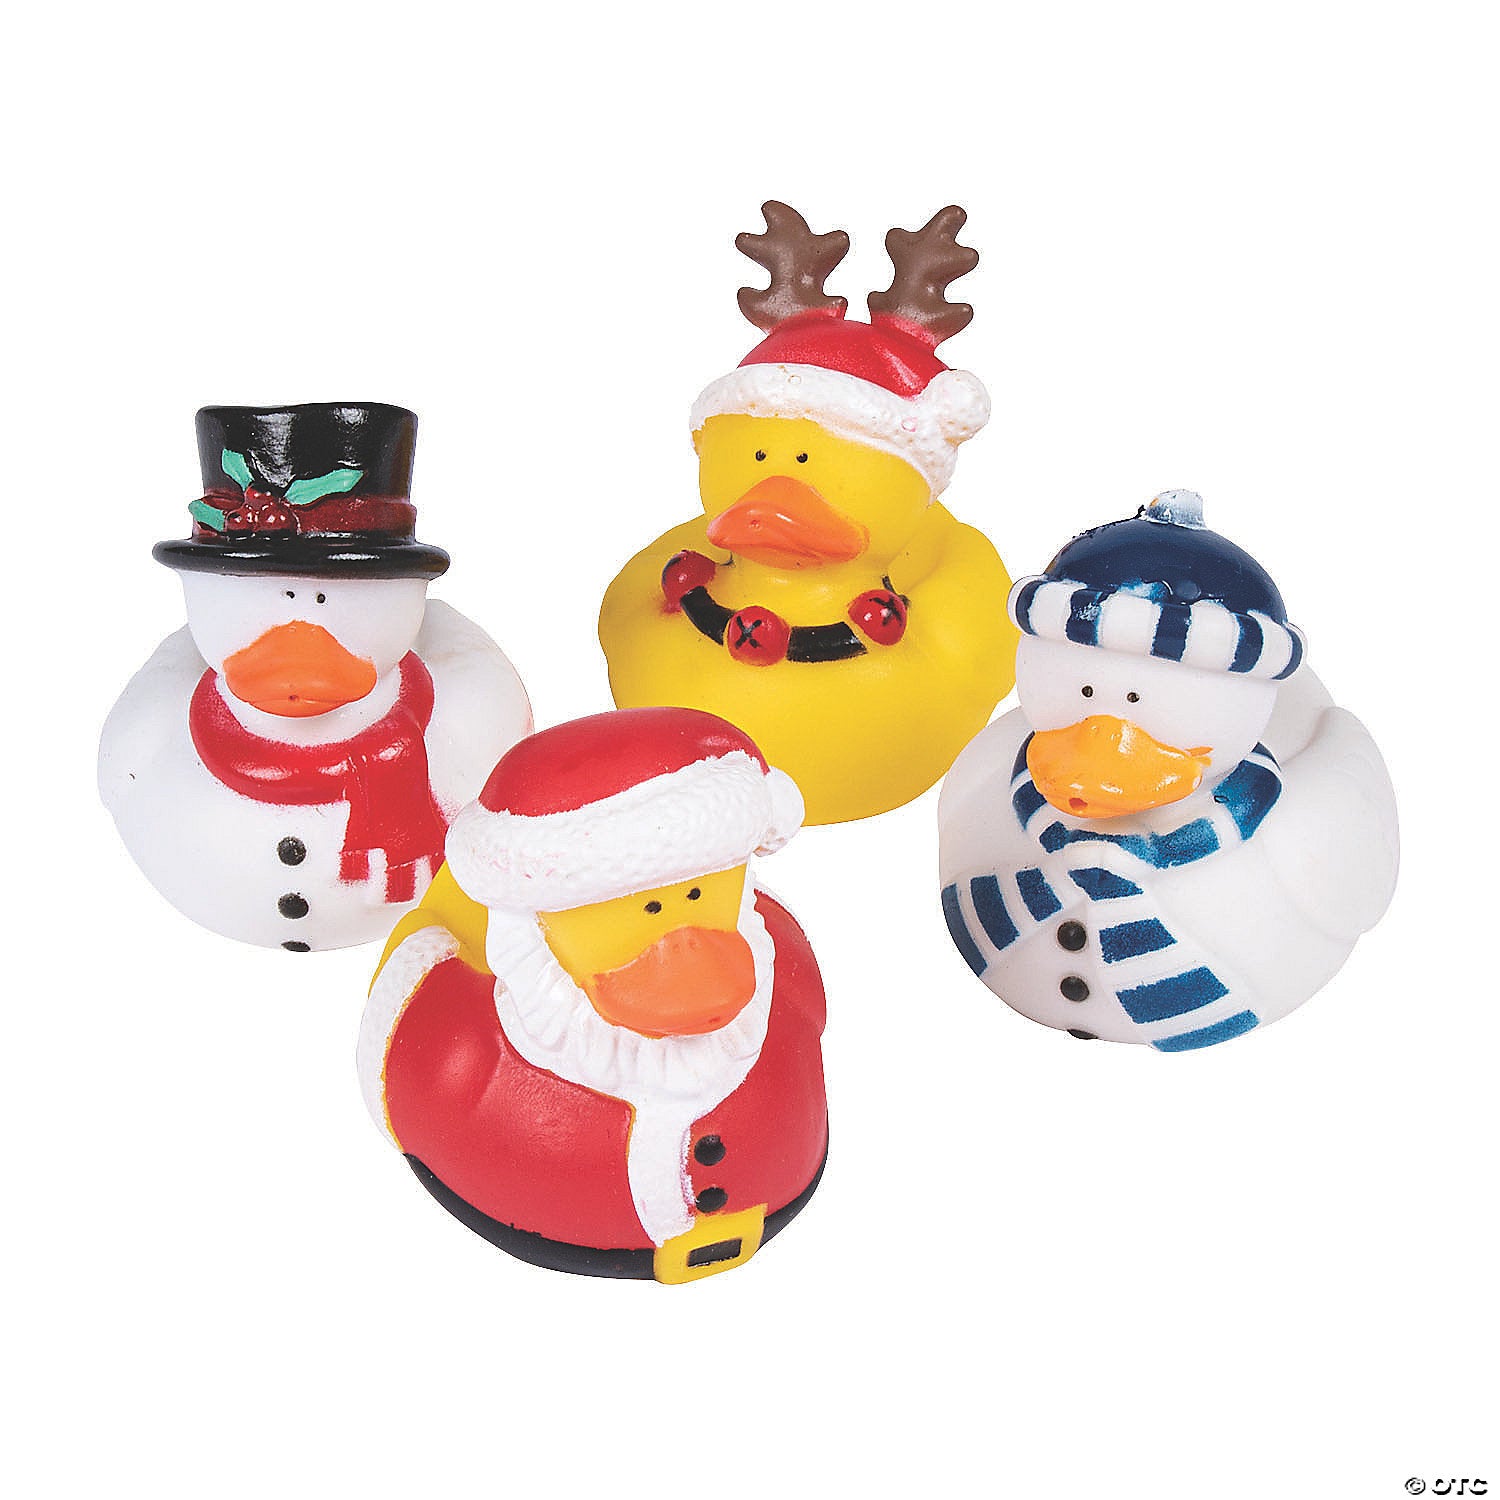 Holiday Rubber Ducks